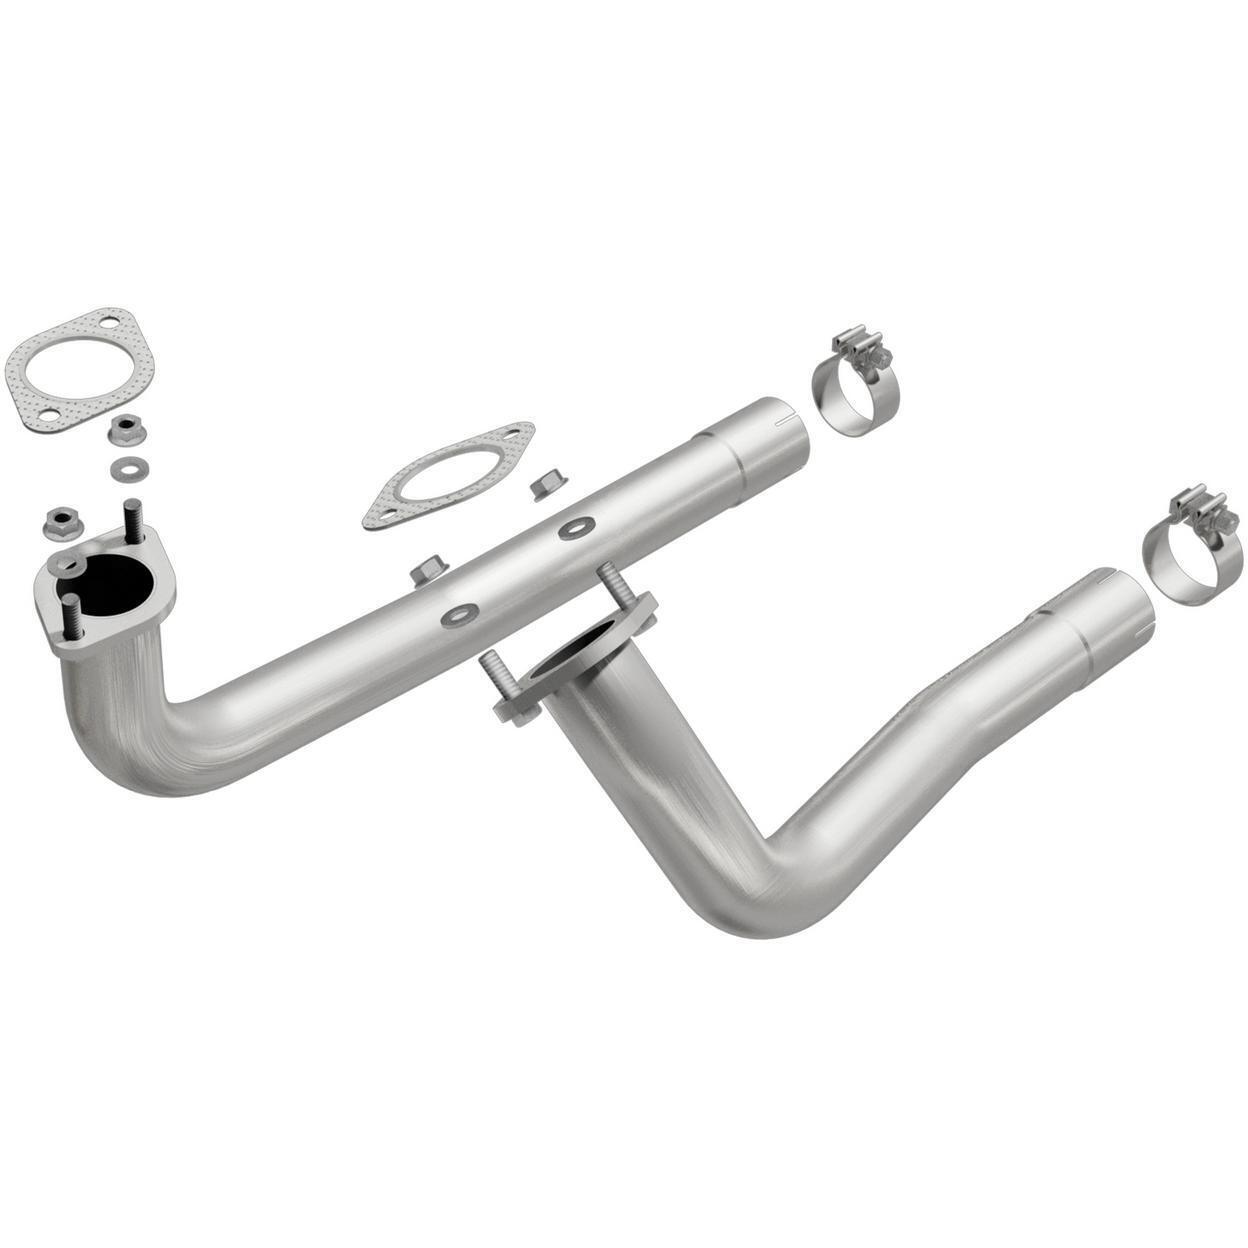 MagnaFlow 19304-MN for 1967-1969 Plymouth Belvedere 7.0L V8 GAS OHV